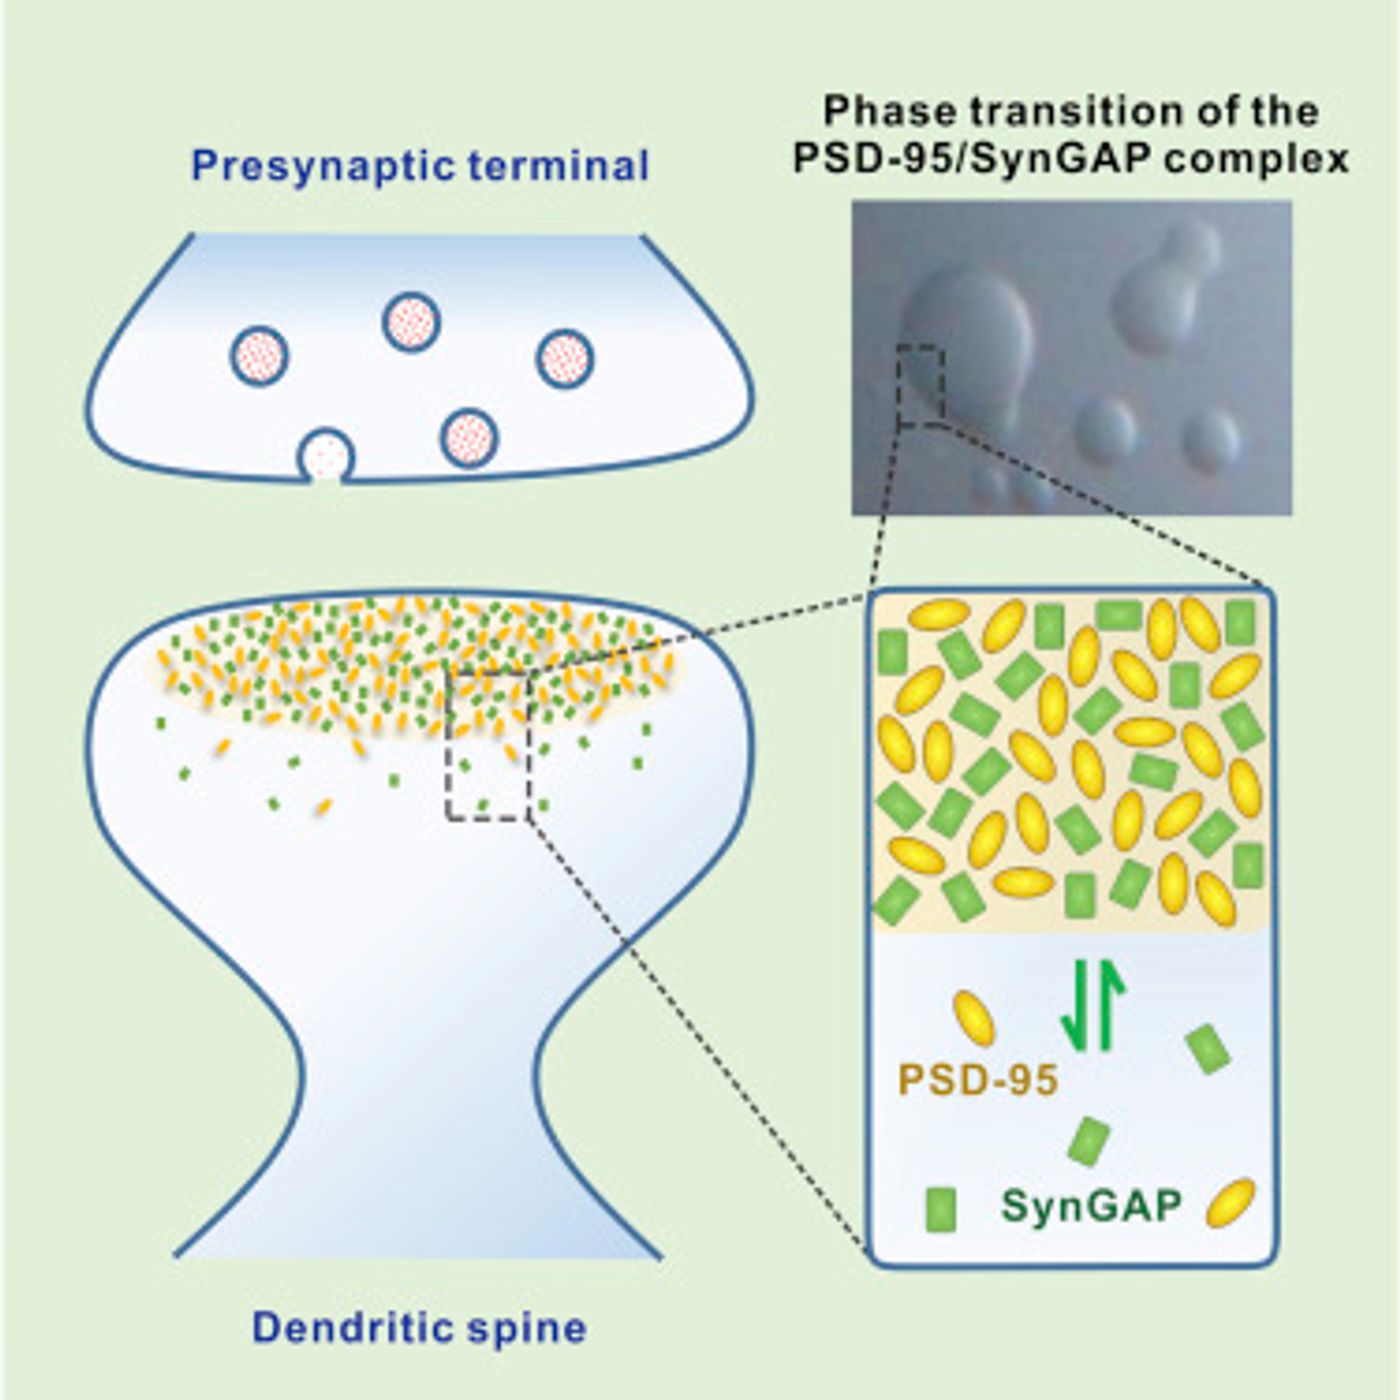 The Synapse and the phase-transtition of SynGAP/PSD-95 complex / Credit: Cell Zeng et al